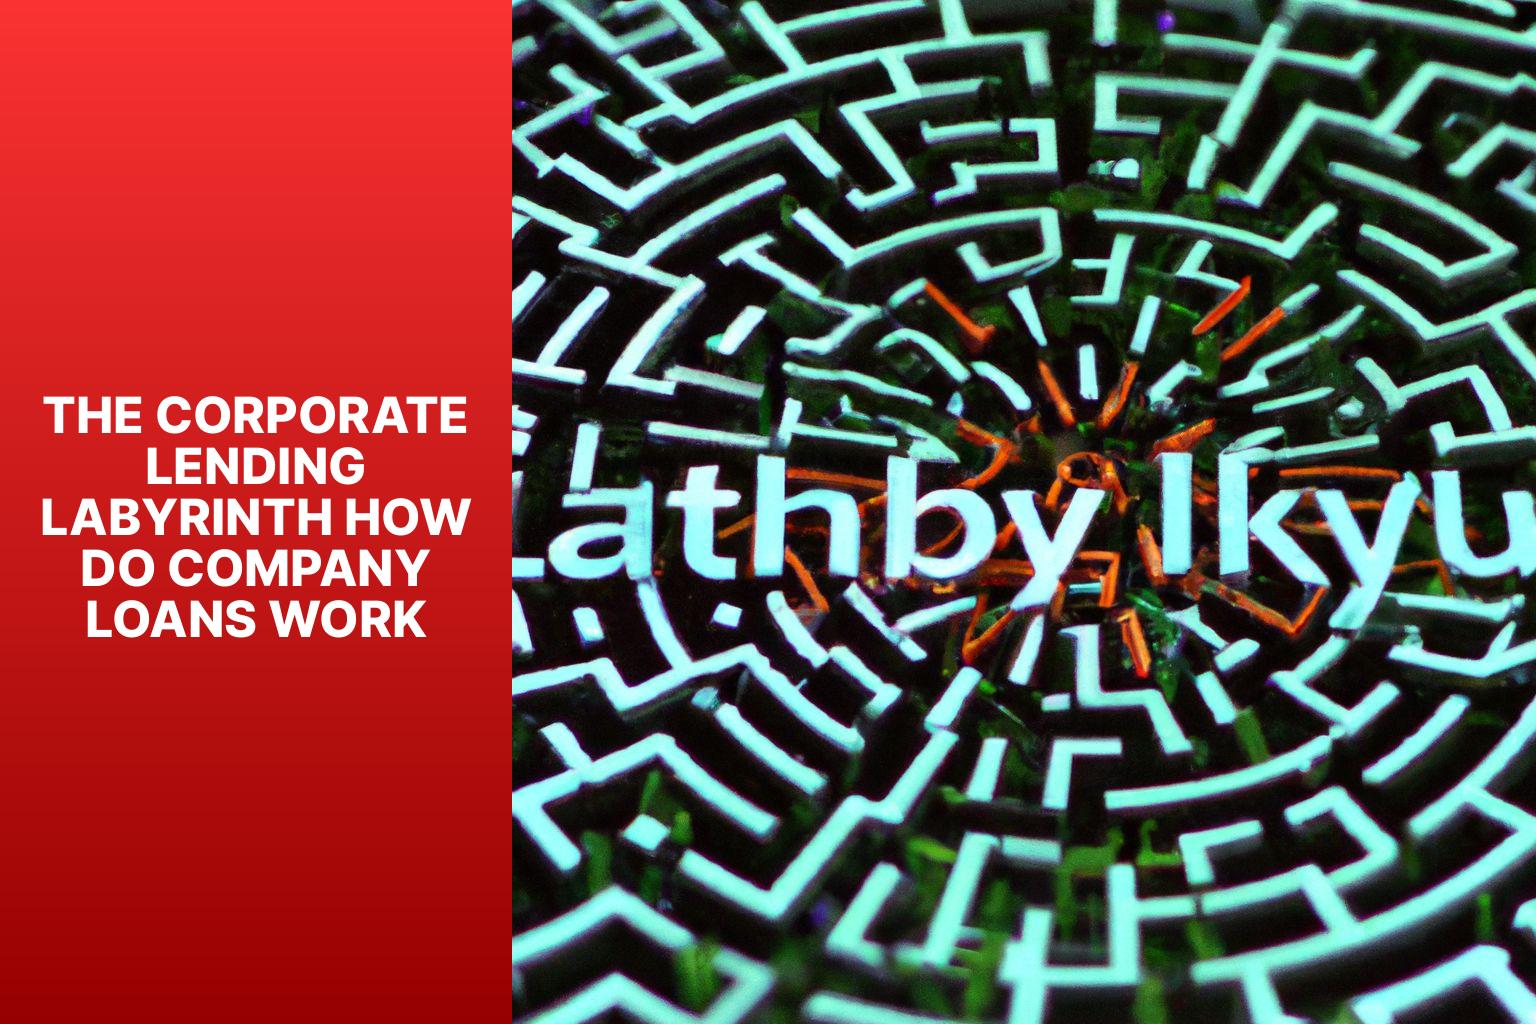 The Corporate Lending Labyrinth How Do Company Loans Work